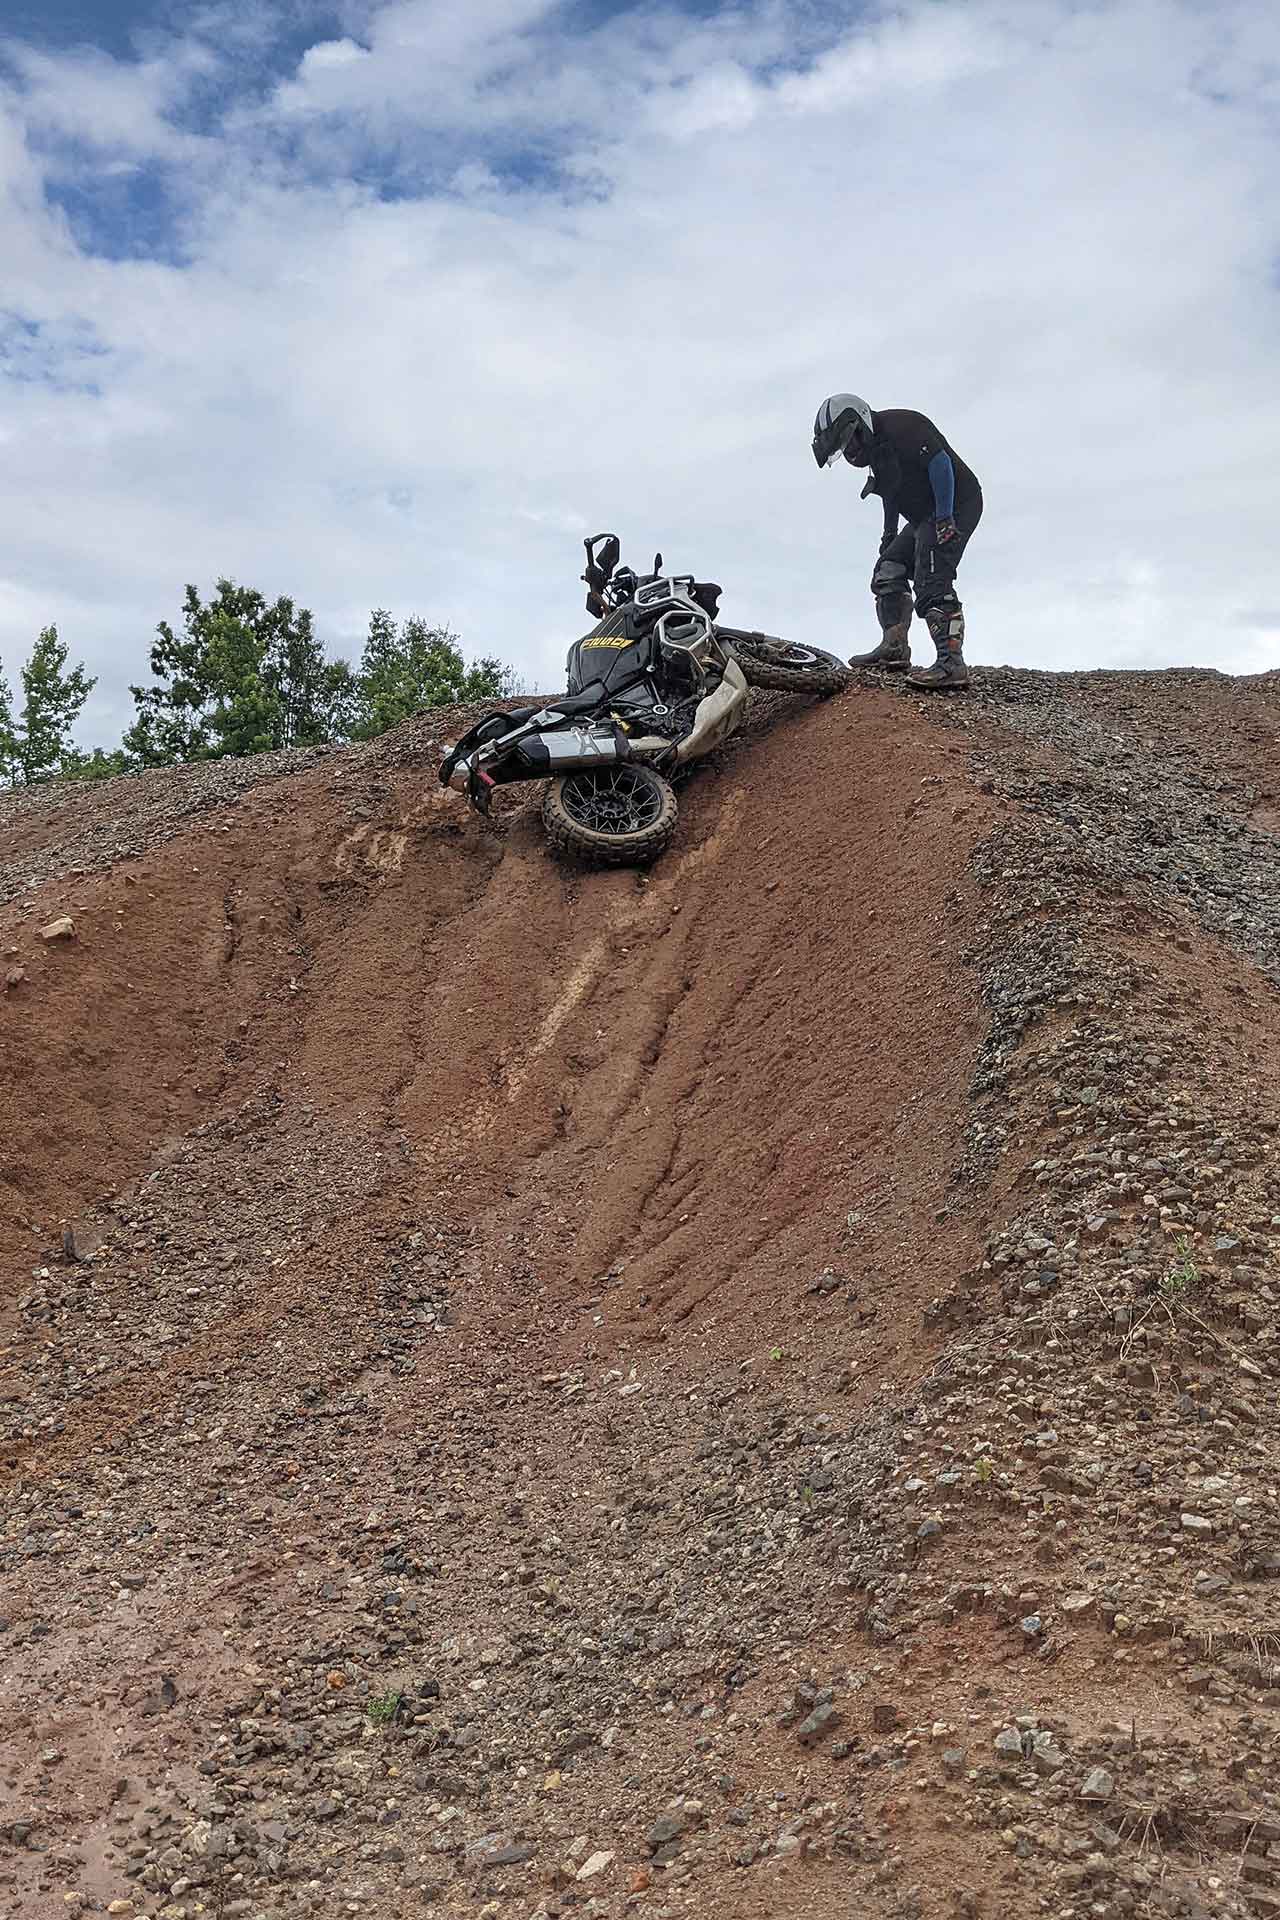 A rider stoops over to pick up his motorcycle near the top of a hill obstacle.